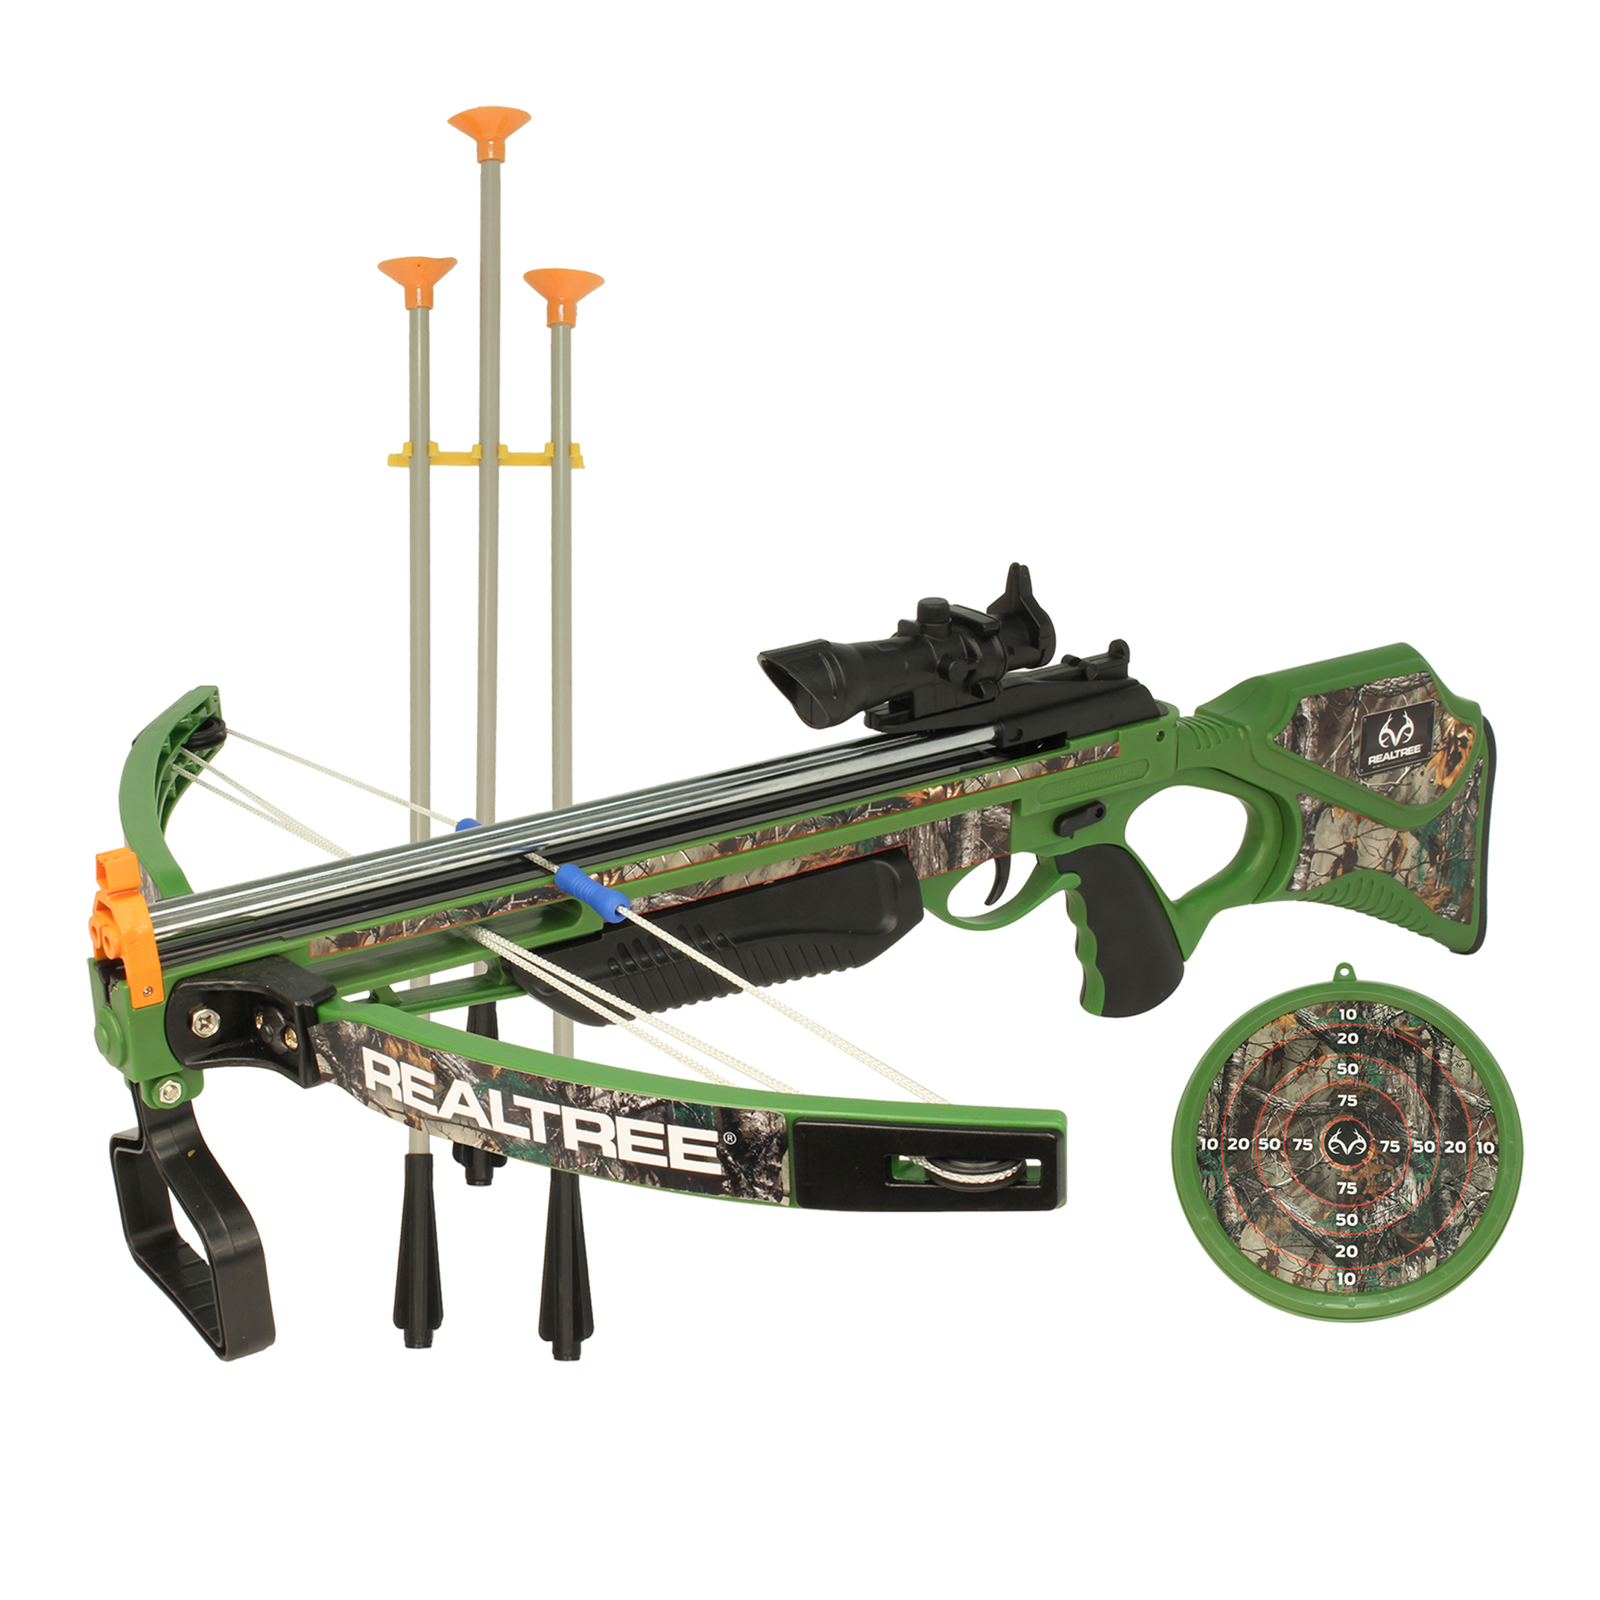 Nkok RealTree 26 Inch Compound Crossbow Set   Toys & Games   Family